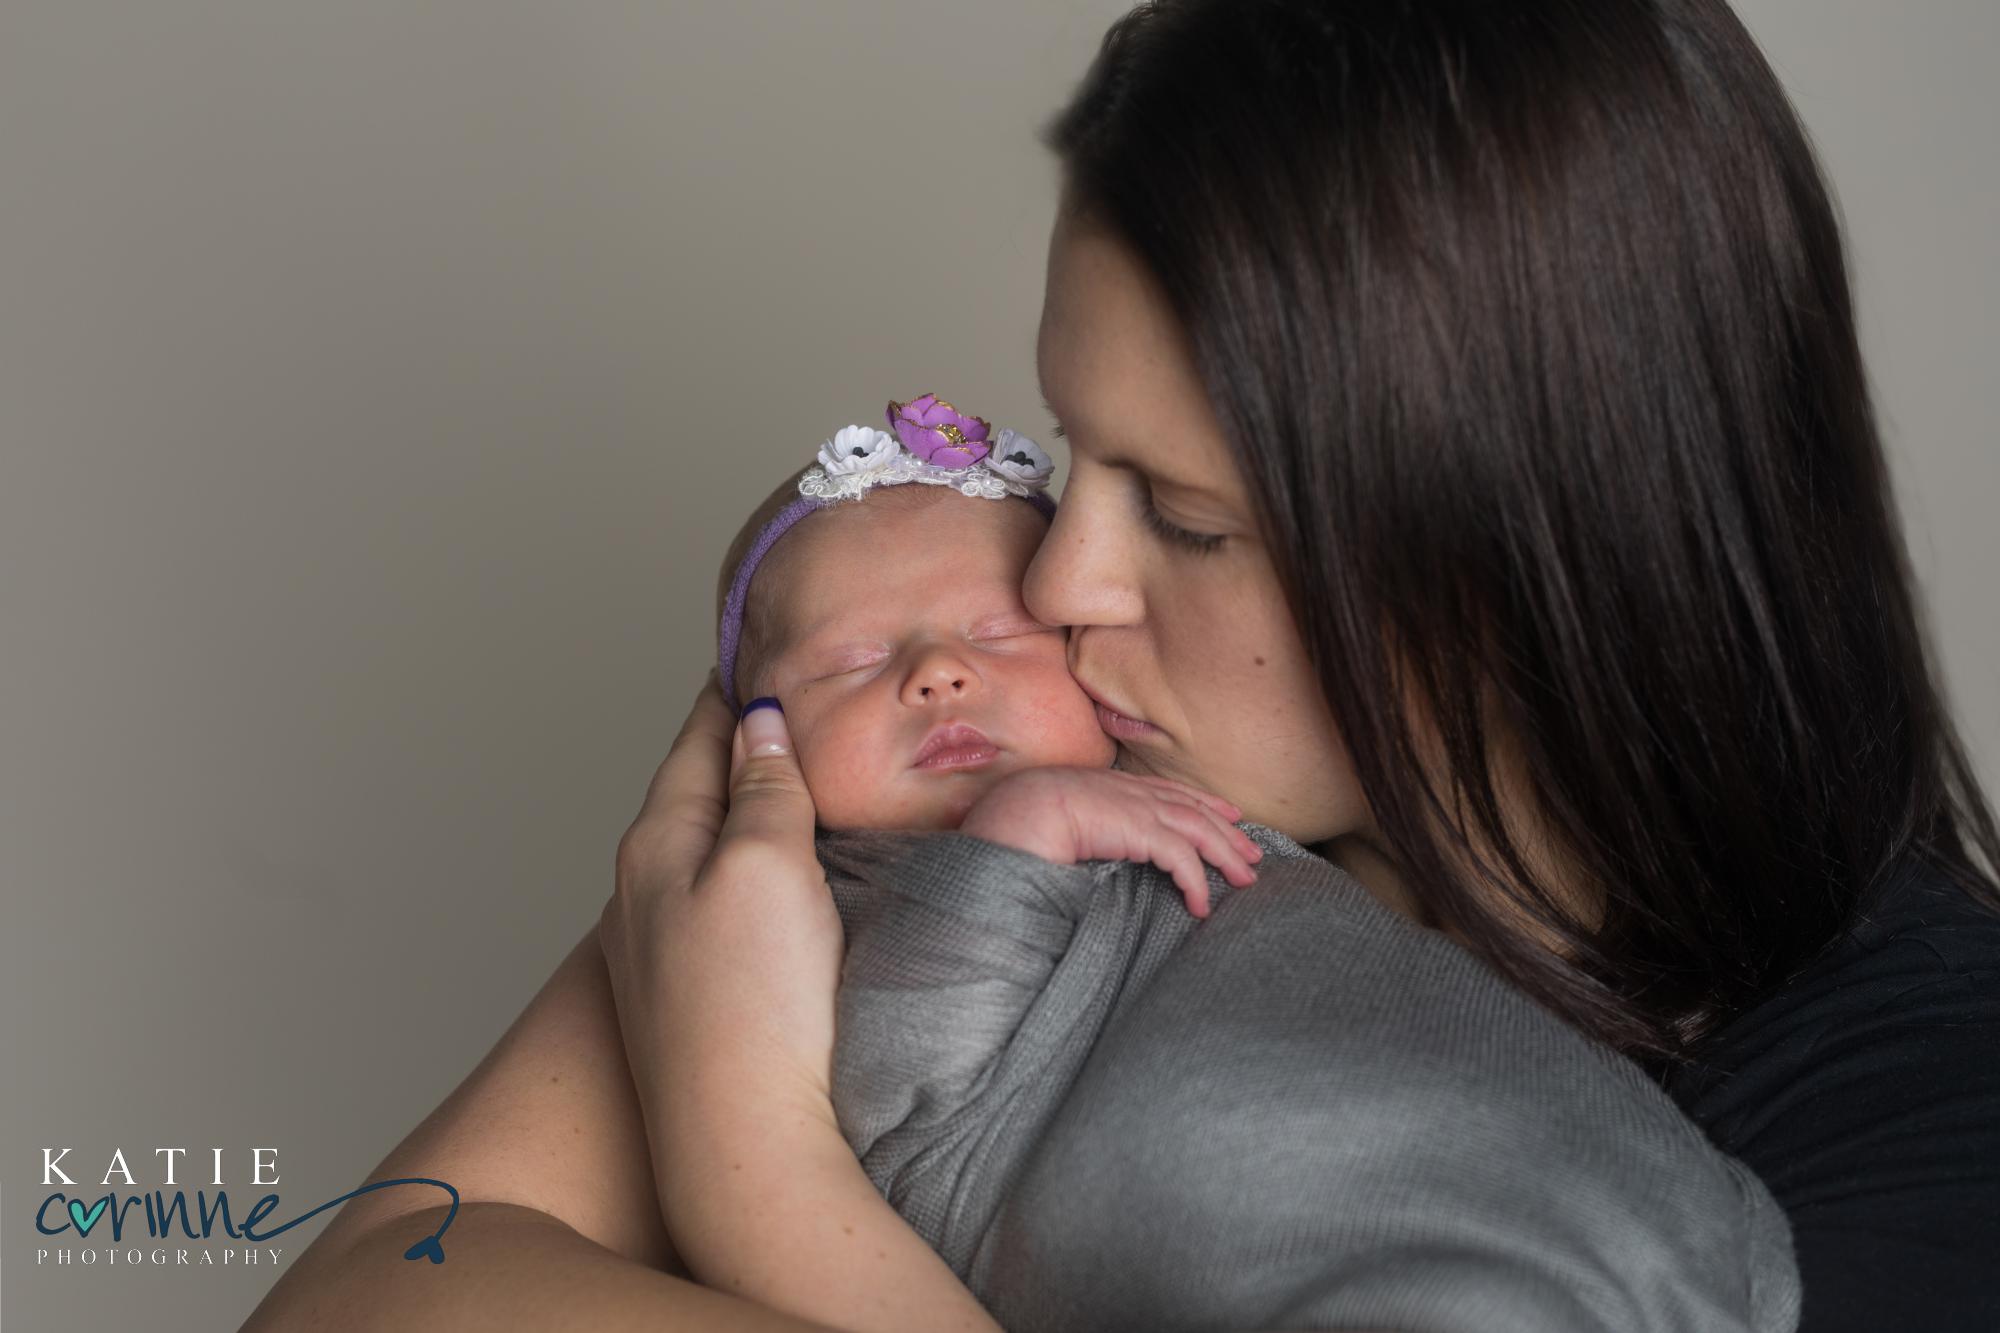 Colorado mother kisses baby daughter for photo